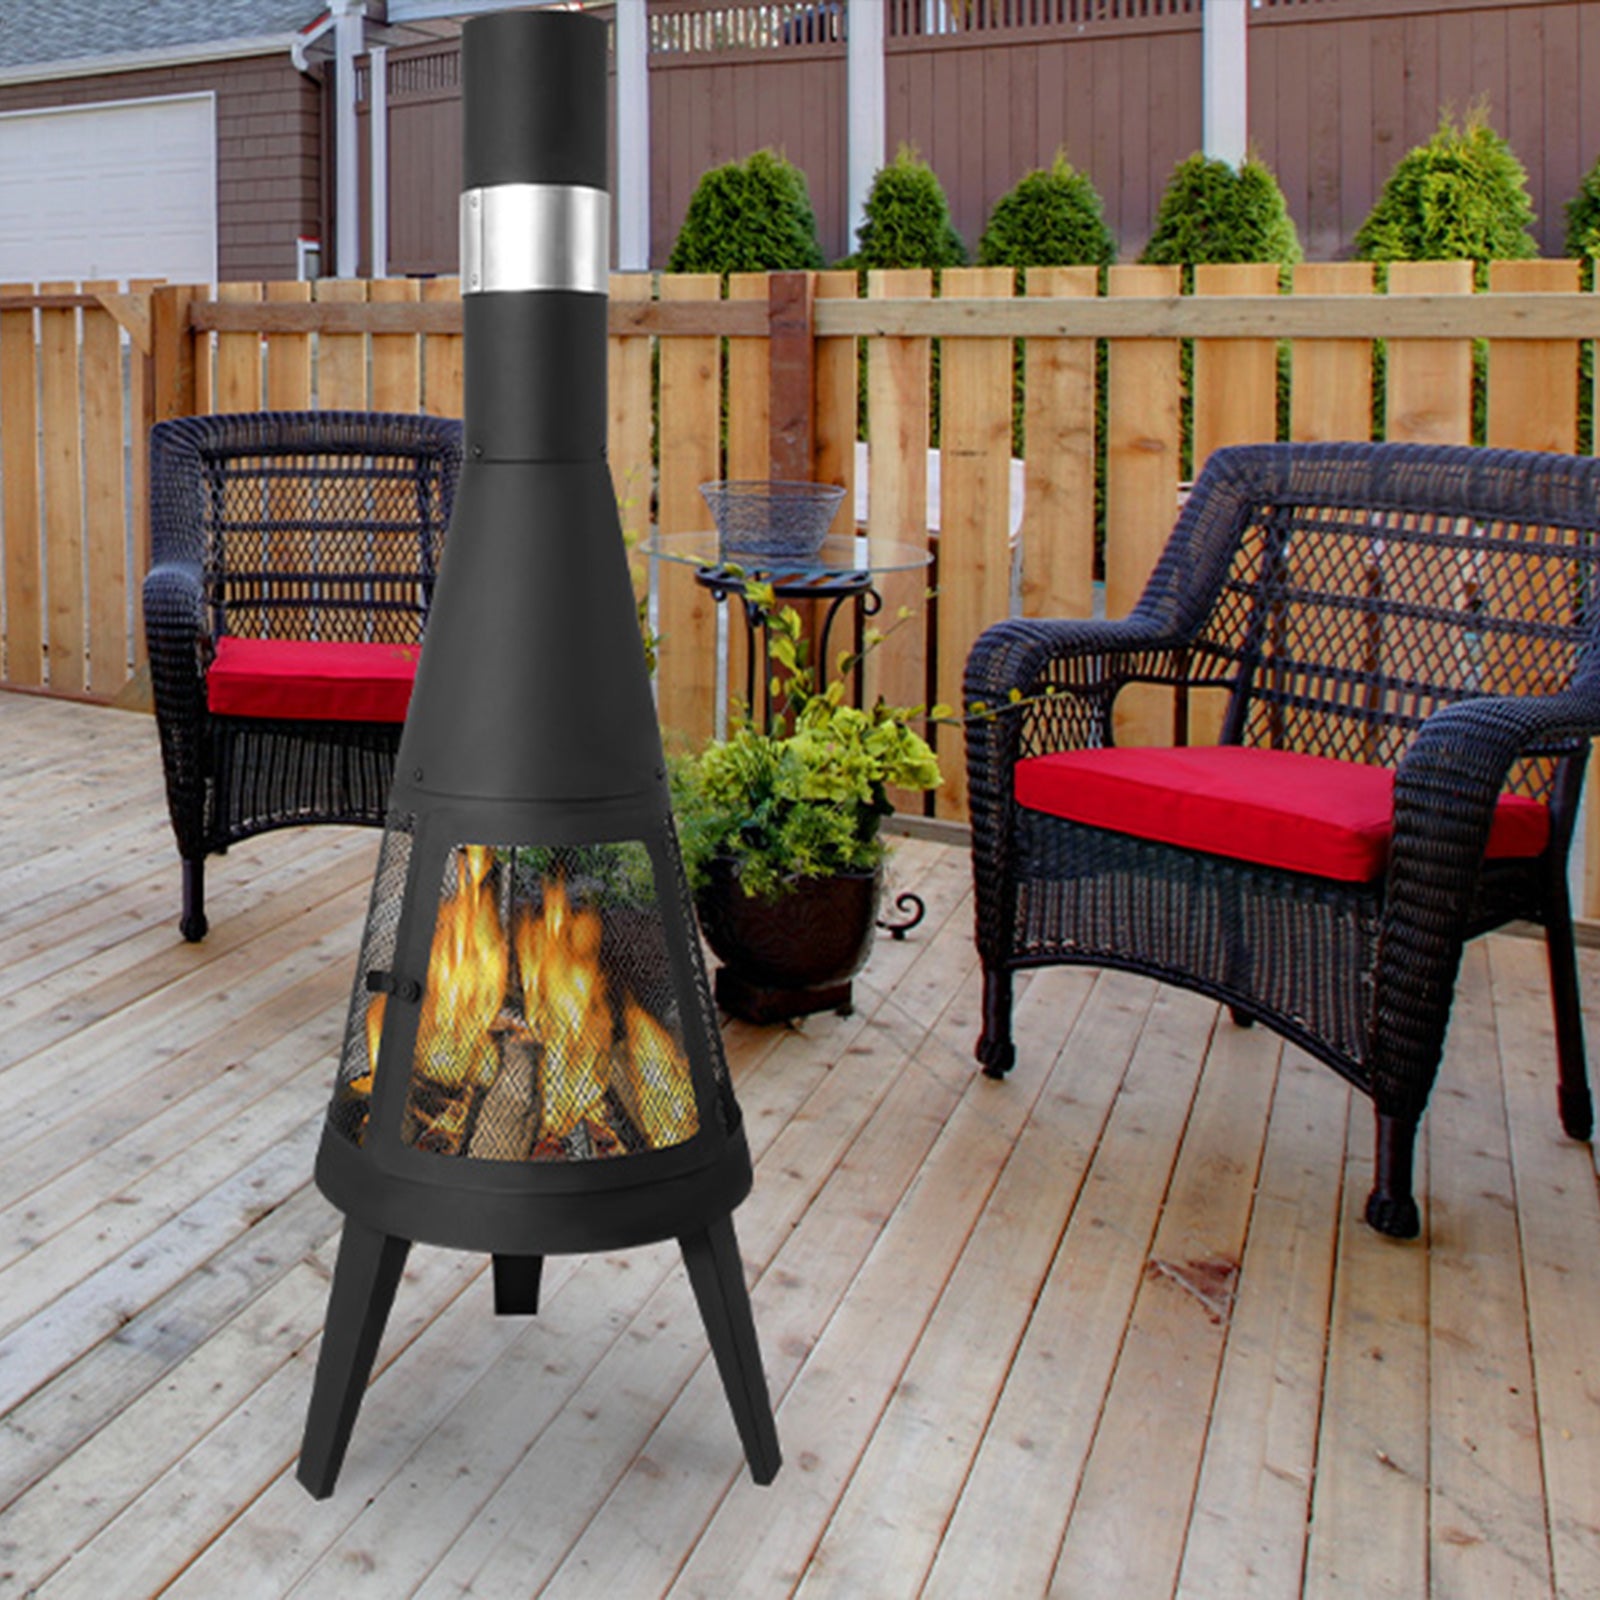 (Out of Stock) Chiminea Outdoor Fireplace 47.6" Metal Wood Burning Fire Pit with Log Grate, Black